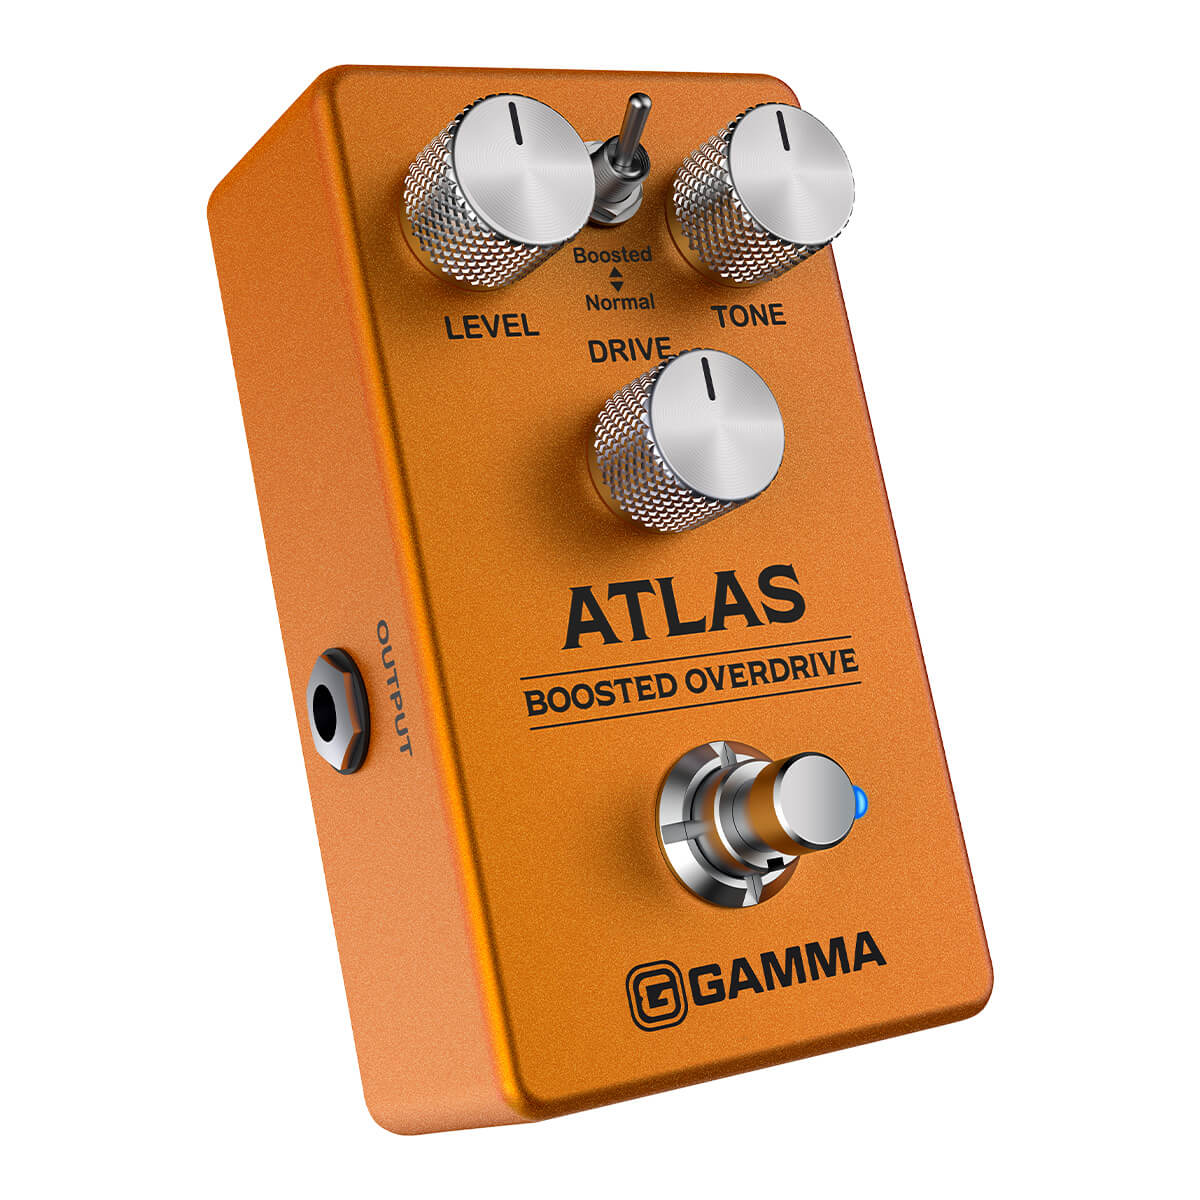 Gamma Atlas boosted overdrive pedal angled right.